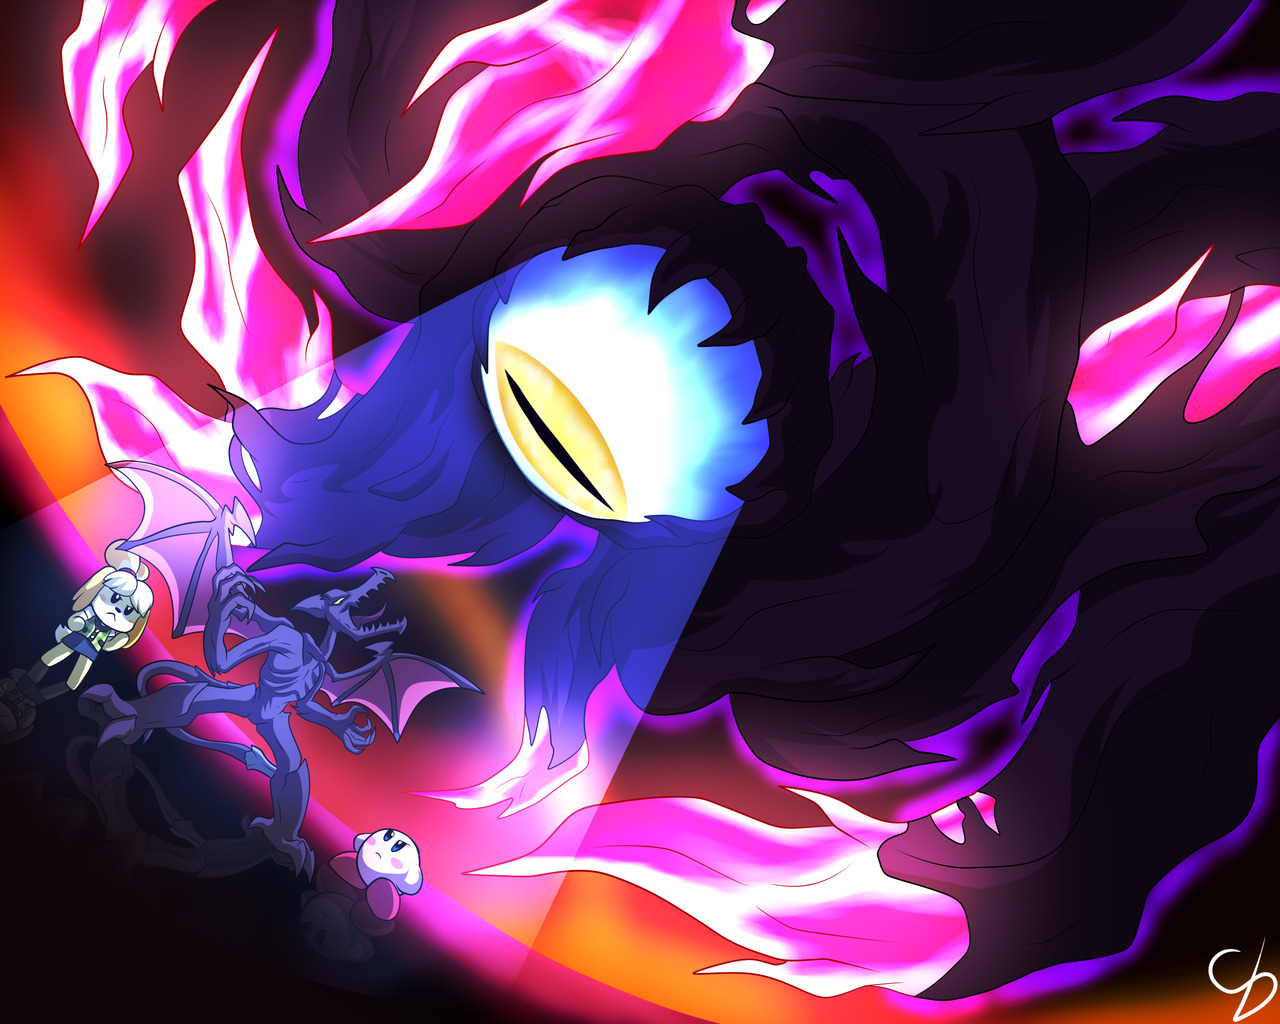 ColorDrake Commissions: Close!, “Fight back the Dark (Dharkon)” “The new smash was